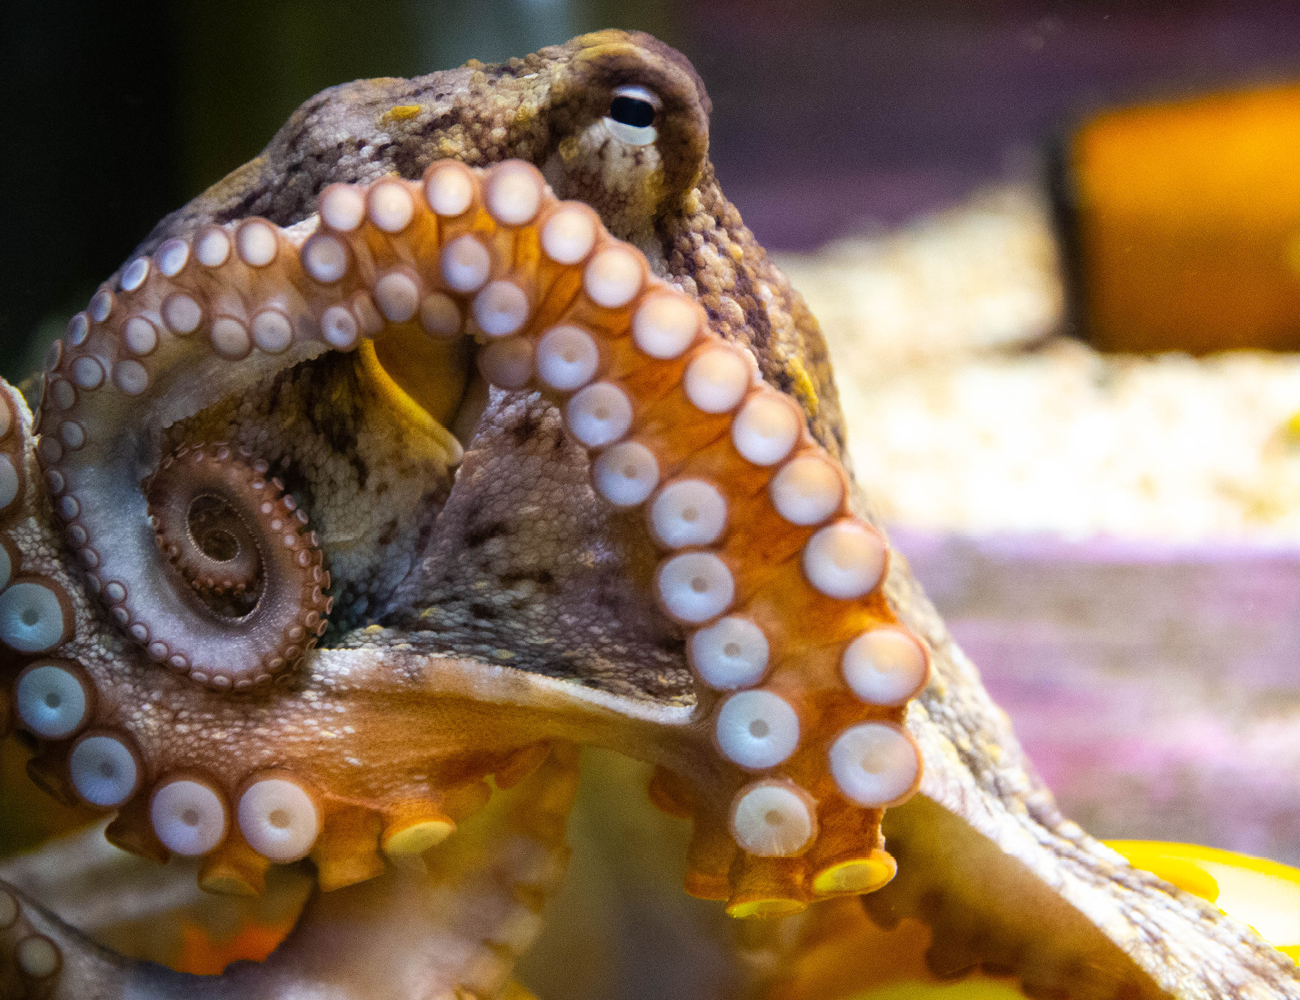 Understand the evolution of colours in animals and watch Veronica the Octopus change colour!